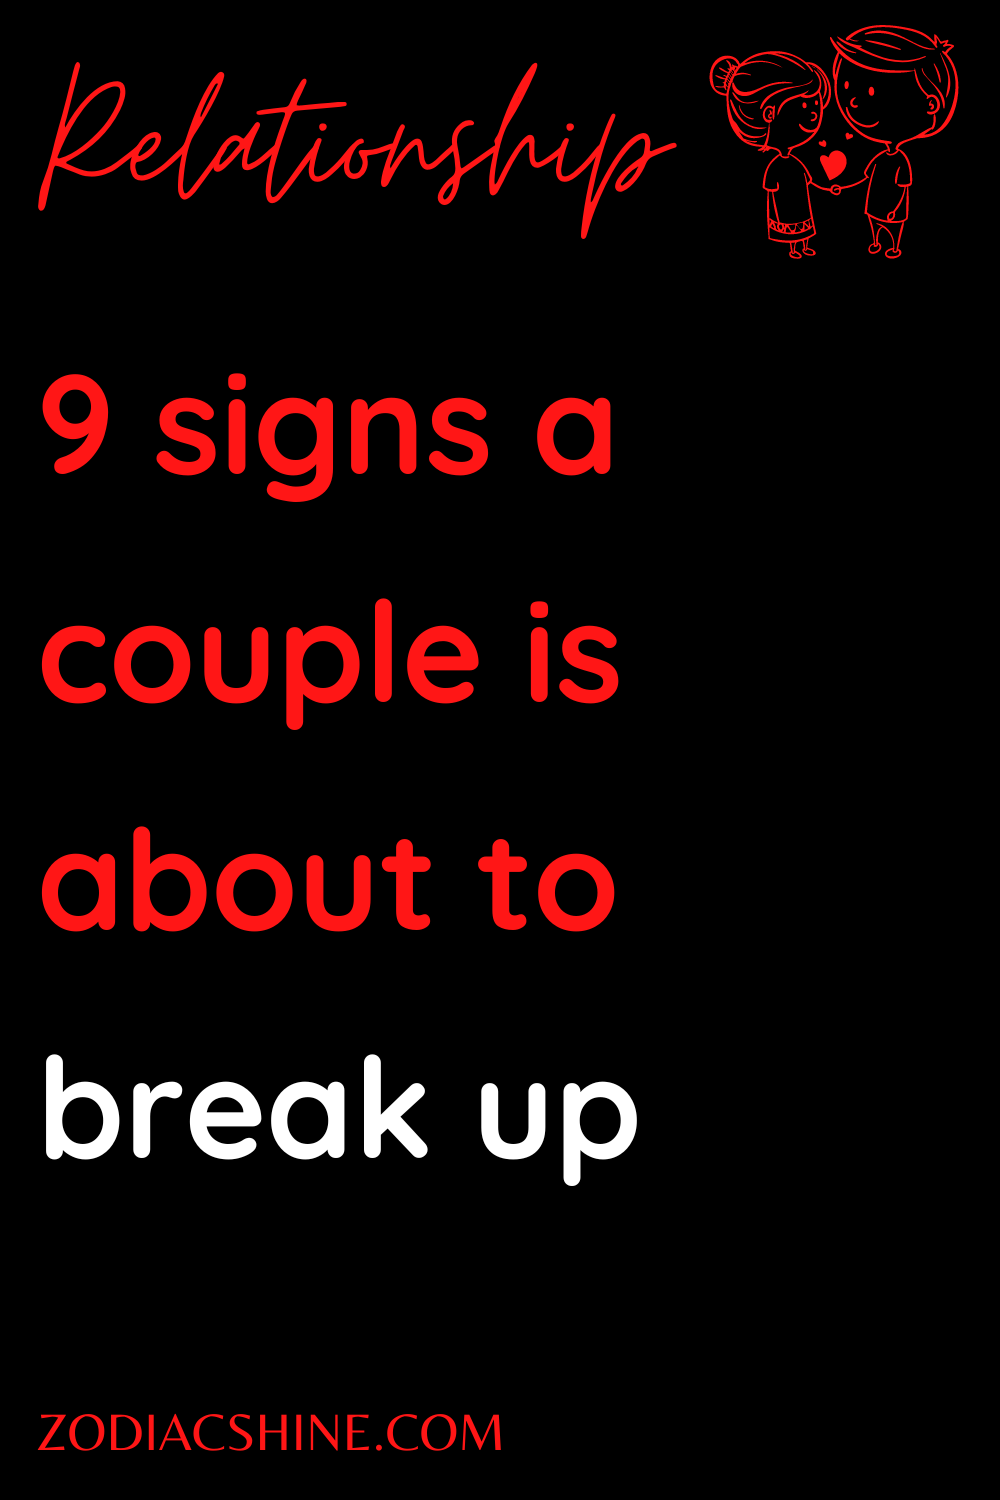 9 signs a couple is about to break up